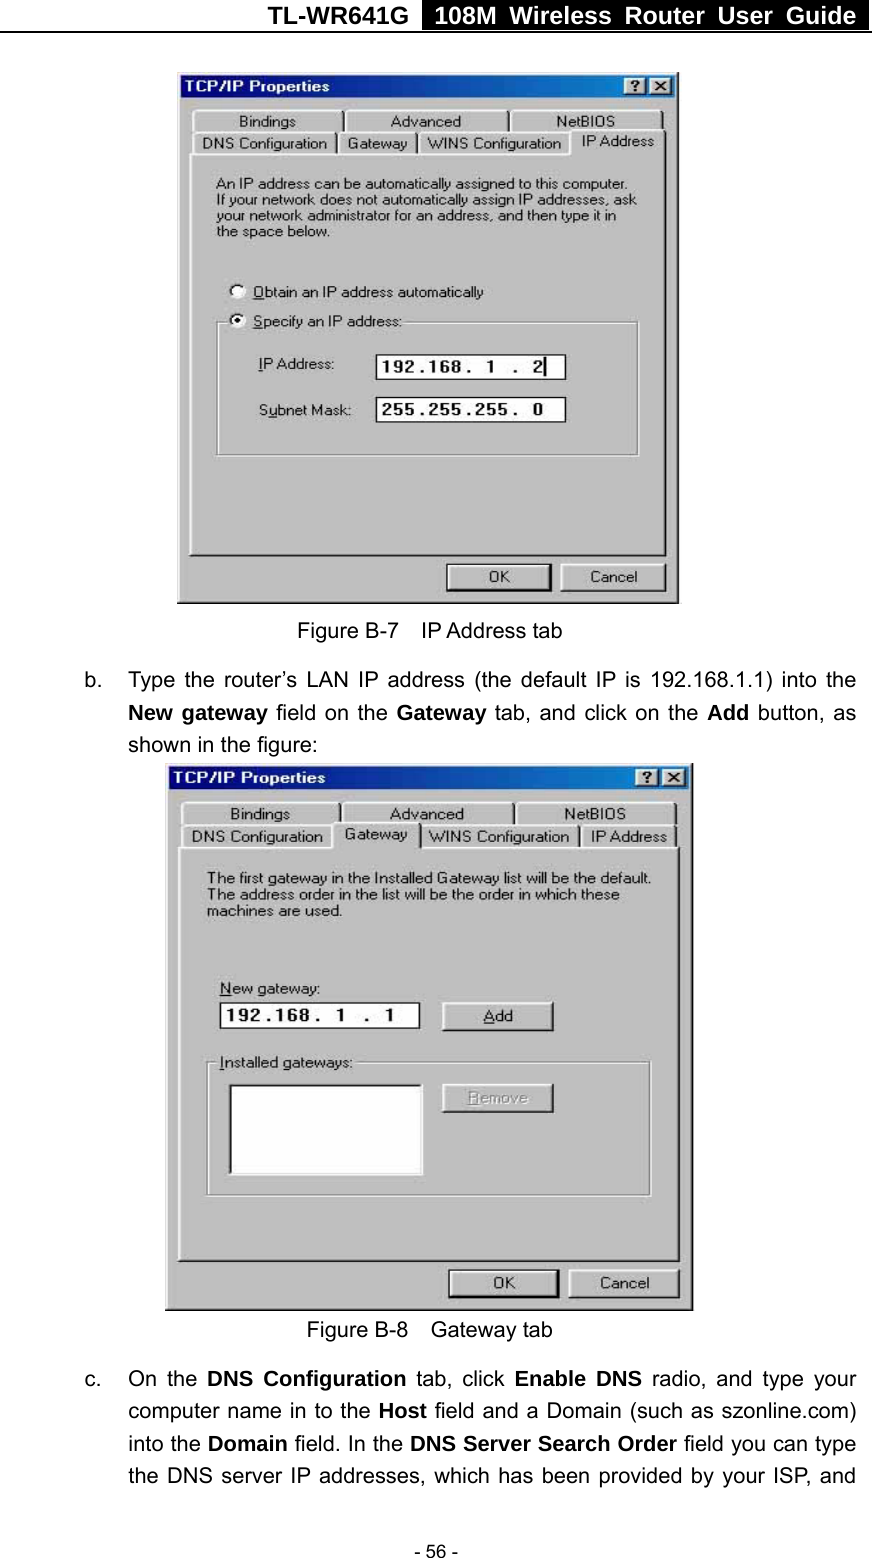 TL-WR641G   108M Wireless Router User Guide   - 56 - Figure B-7  IP Address tab b.  Type the router’s LAN IP address (the default IP is 192.168.1.1) into the New gateway field on the Gateway tab, and click on the Add button, as shown in the figure:    Figure B-8  Gateway tab c. On the DNS Configuration tab, click Enable DNS radio, and type your computer name in to the Host field and a Domain (such as szonline.com) into the Domain field. In the DNS Server Search Order field you can type the DNS server IP addresses, which has been provided by your ISP, and 